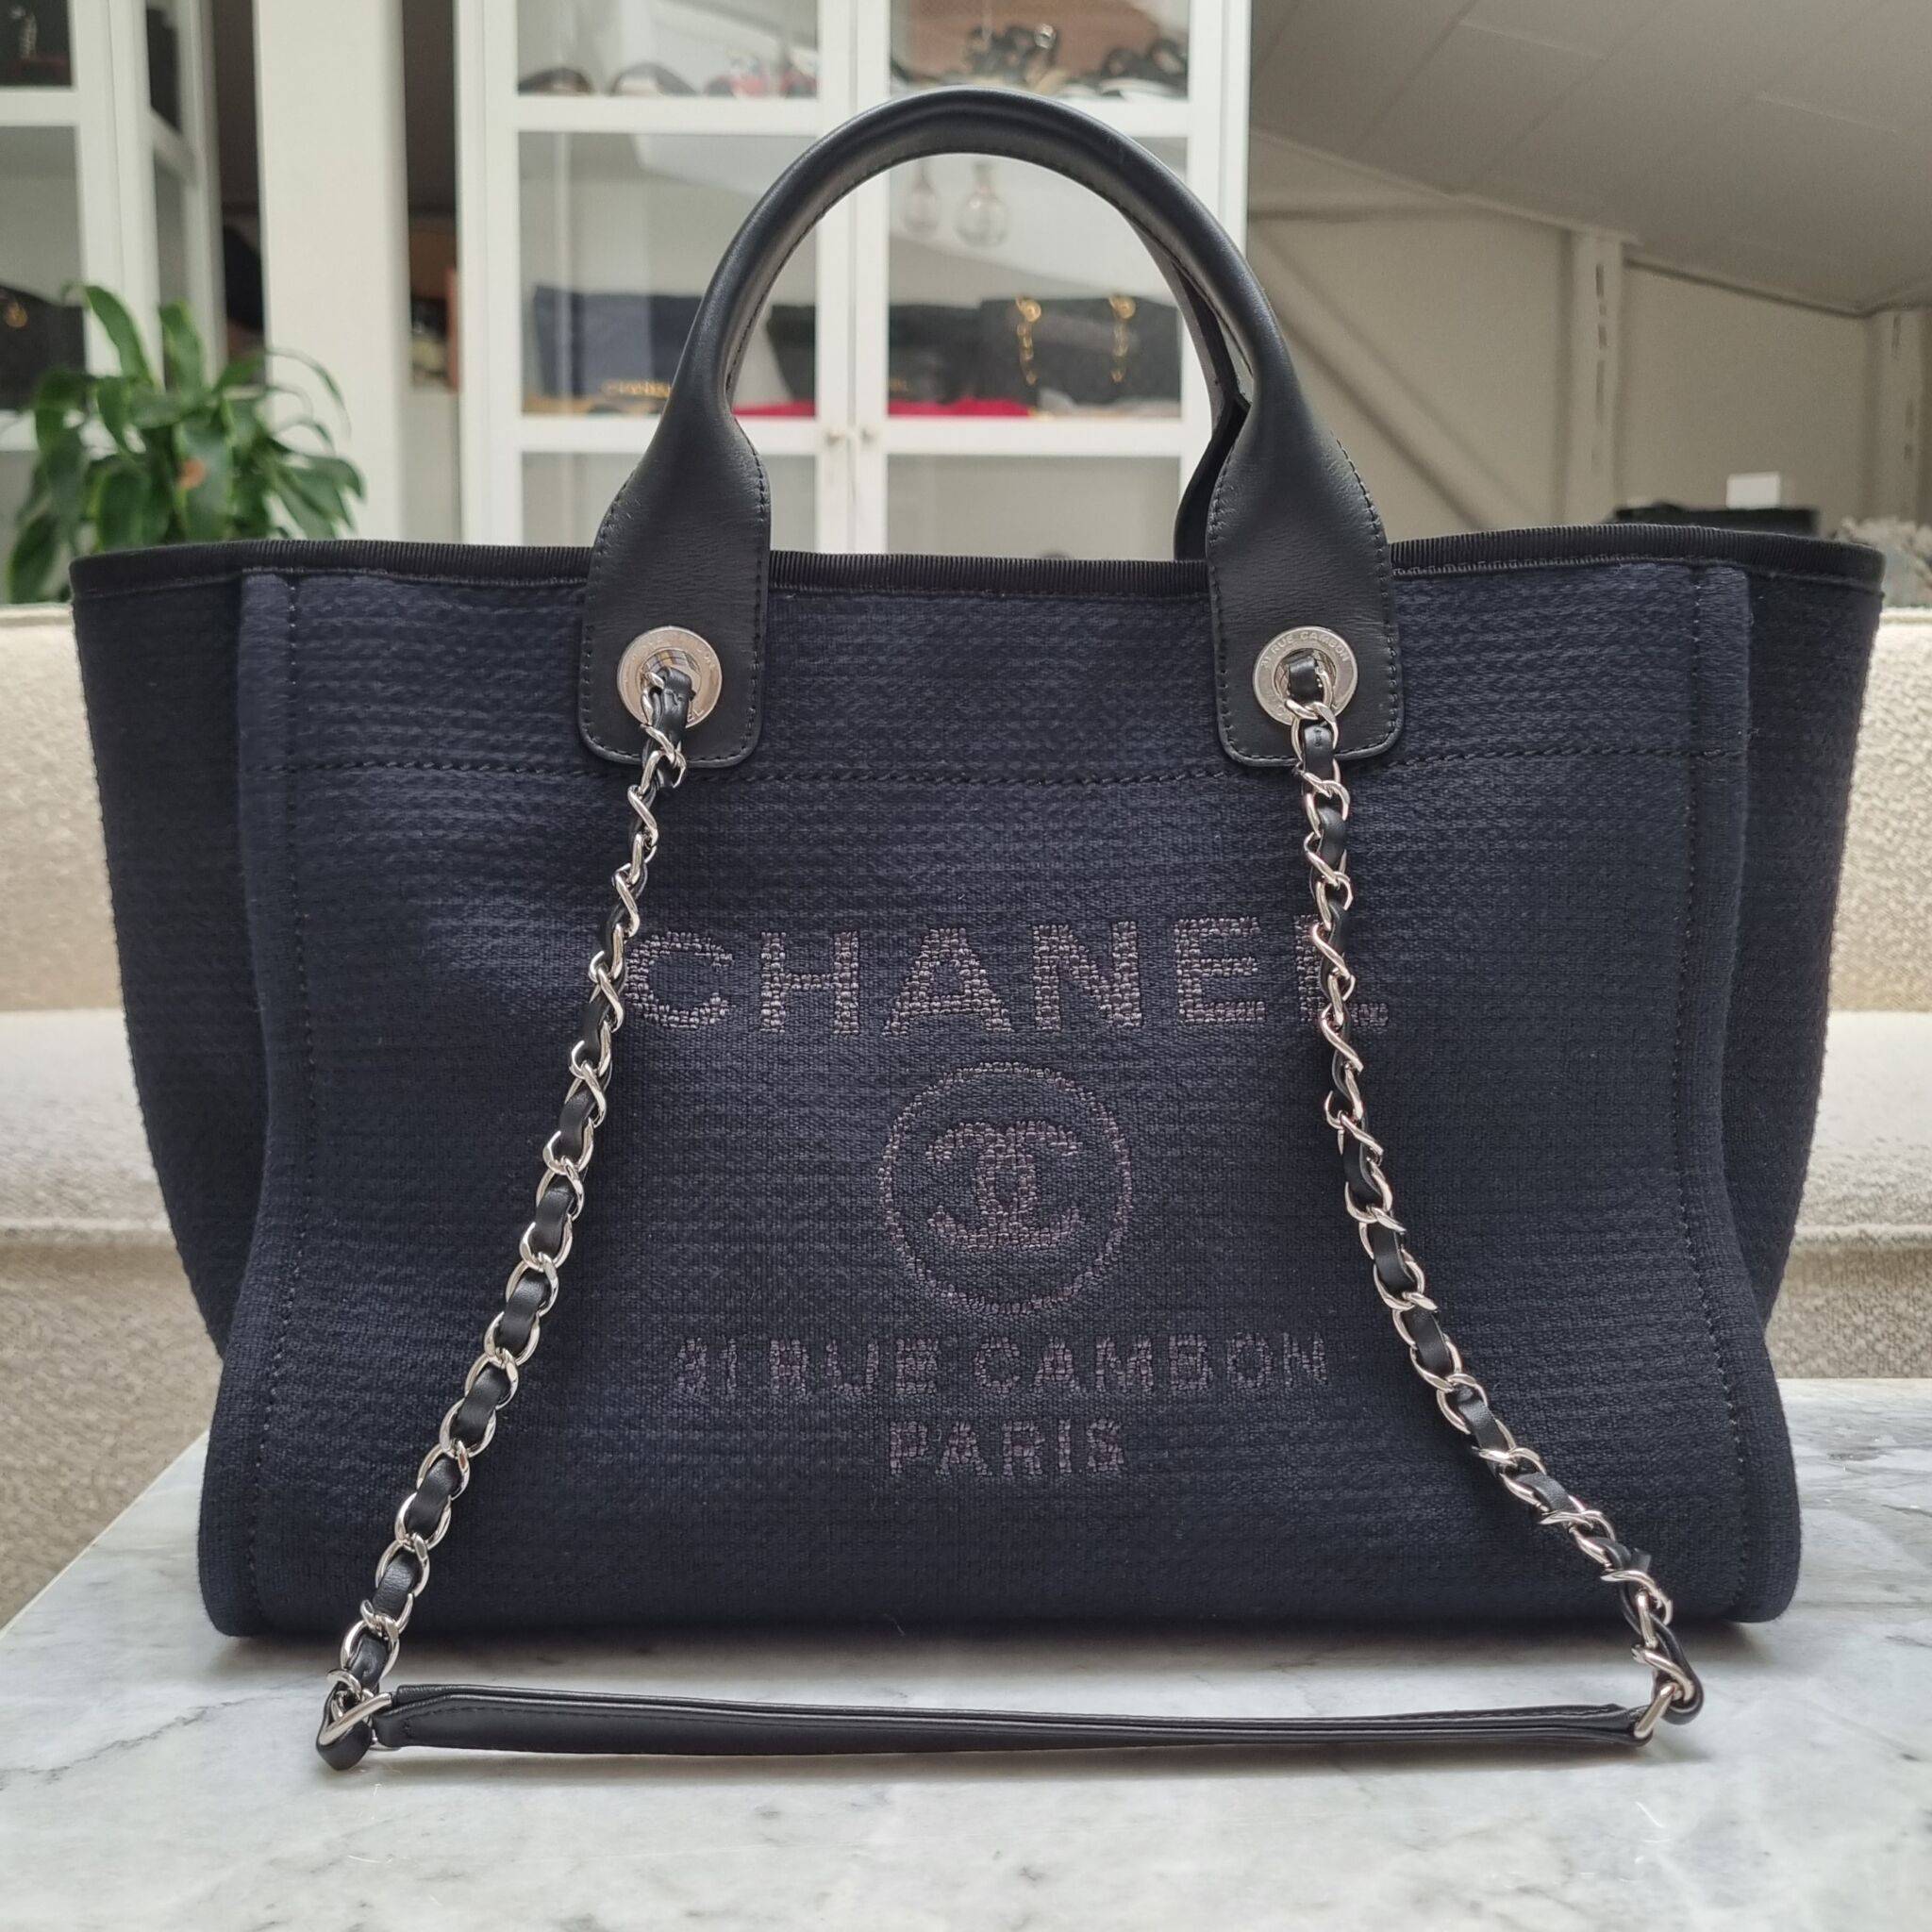 Cafe assistent Blive opmærksom Chanel Small Deauville, Black SHW - Laulay Luxury